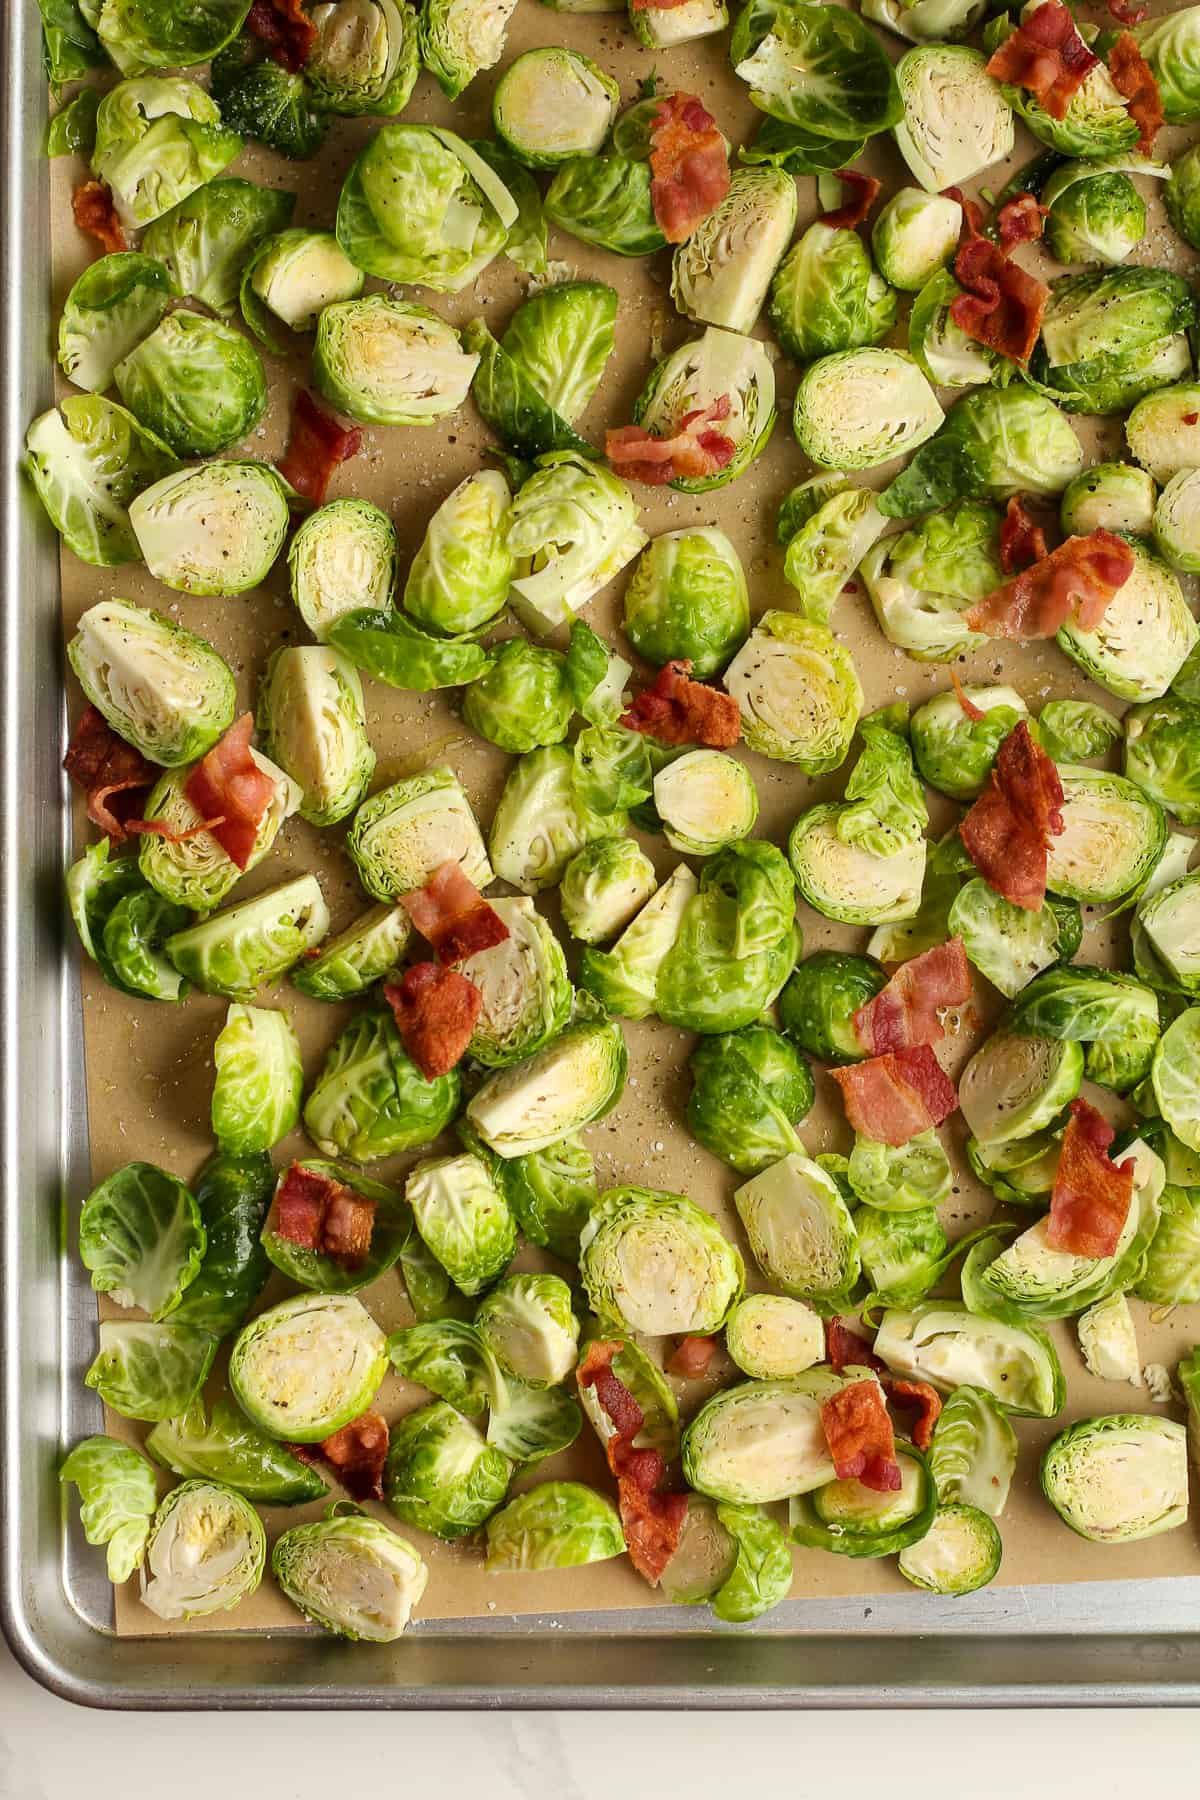 The raw chopped Brussels sprouts and bacon.